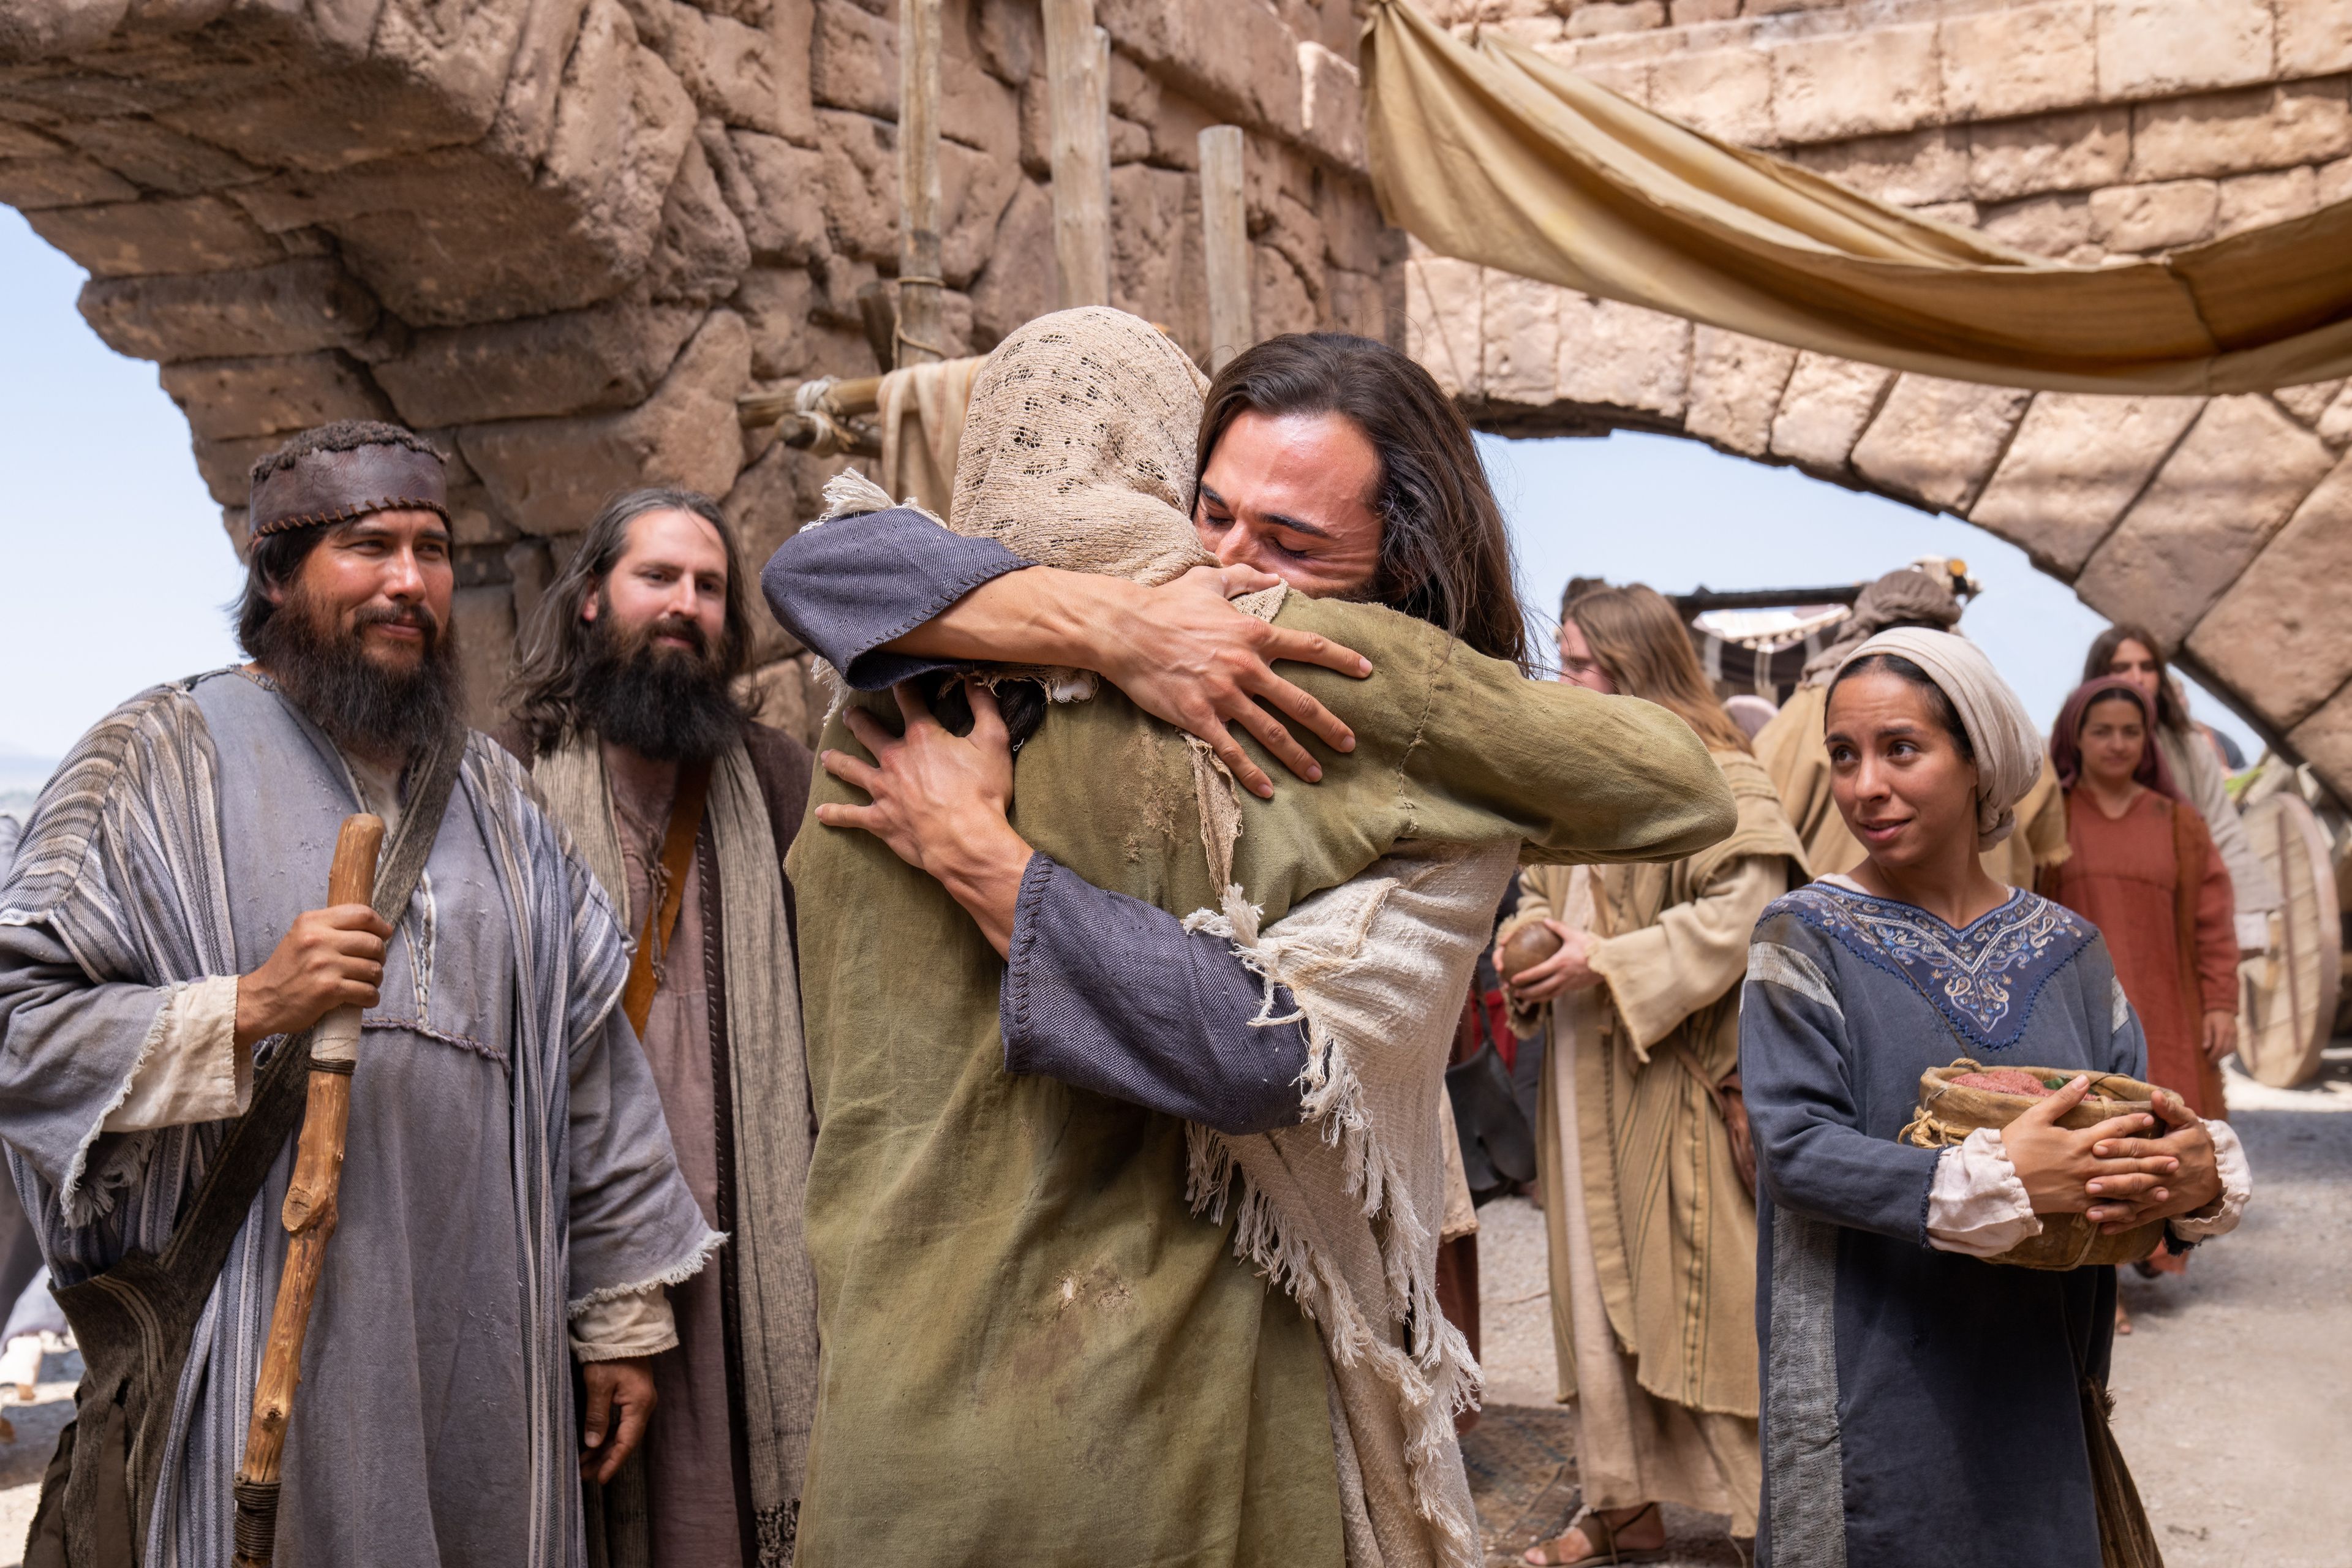 Jesus Christ greets Peter in an embrace. Near them are John and James.